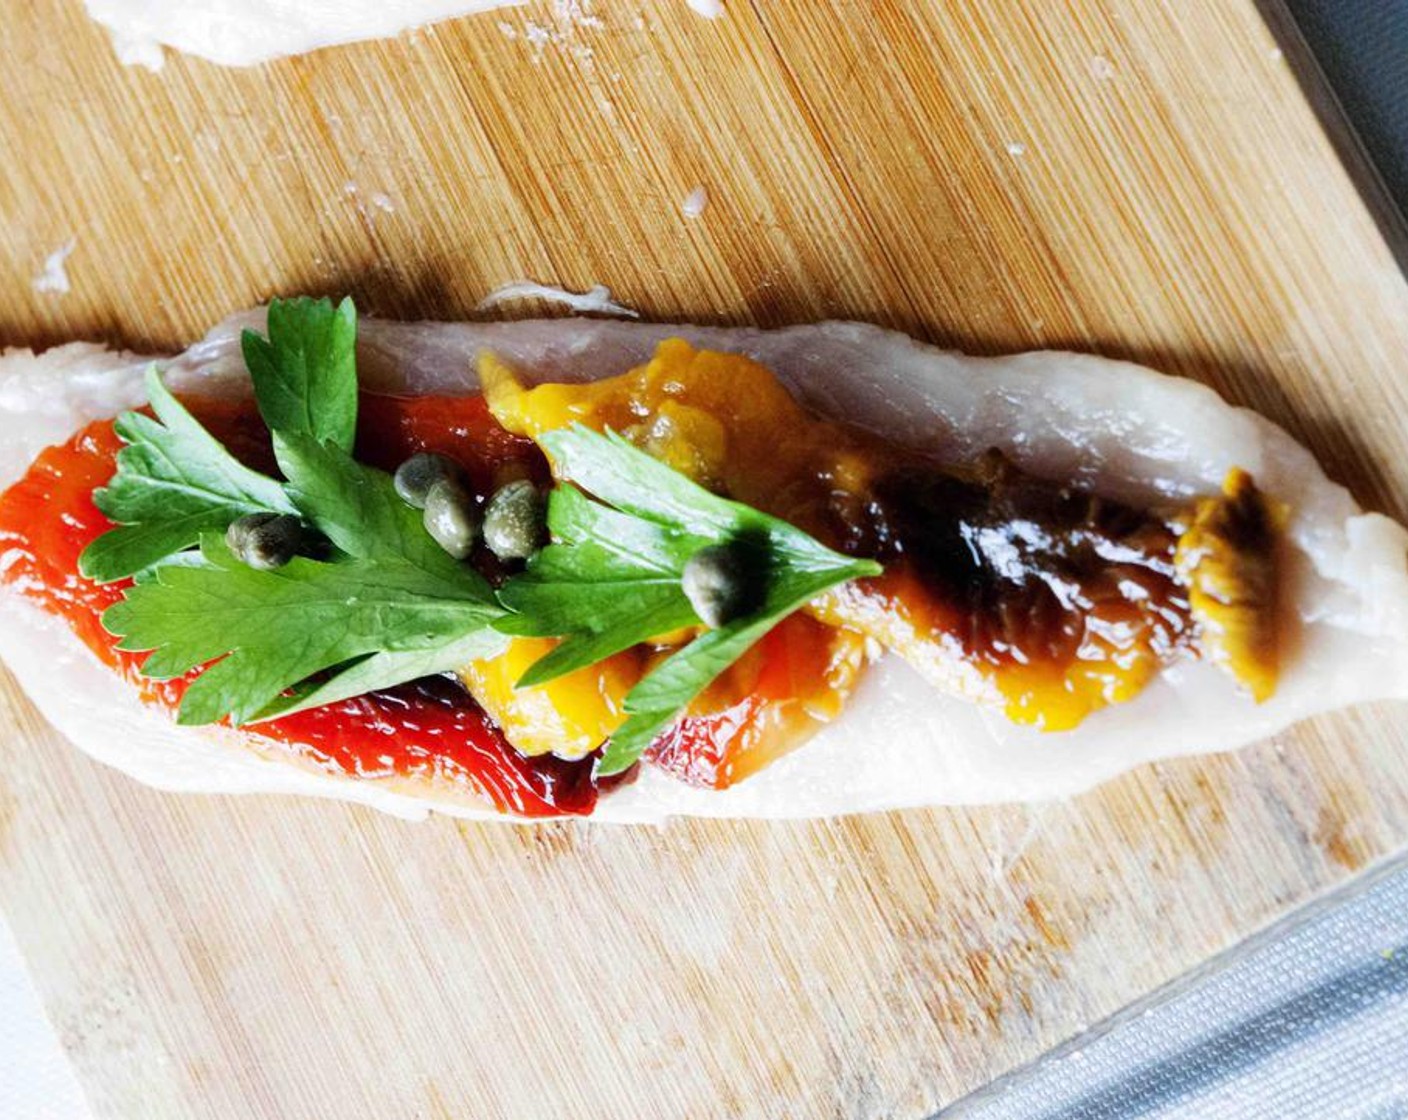 step 3 On each slice of chicken place a slice of red and a slice of yellow bell peppers, some Capers (1 Tbsp) and Italian Flat-Leaf Parsley (to taste).